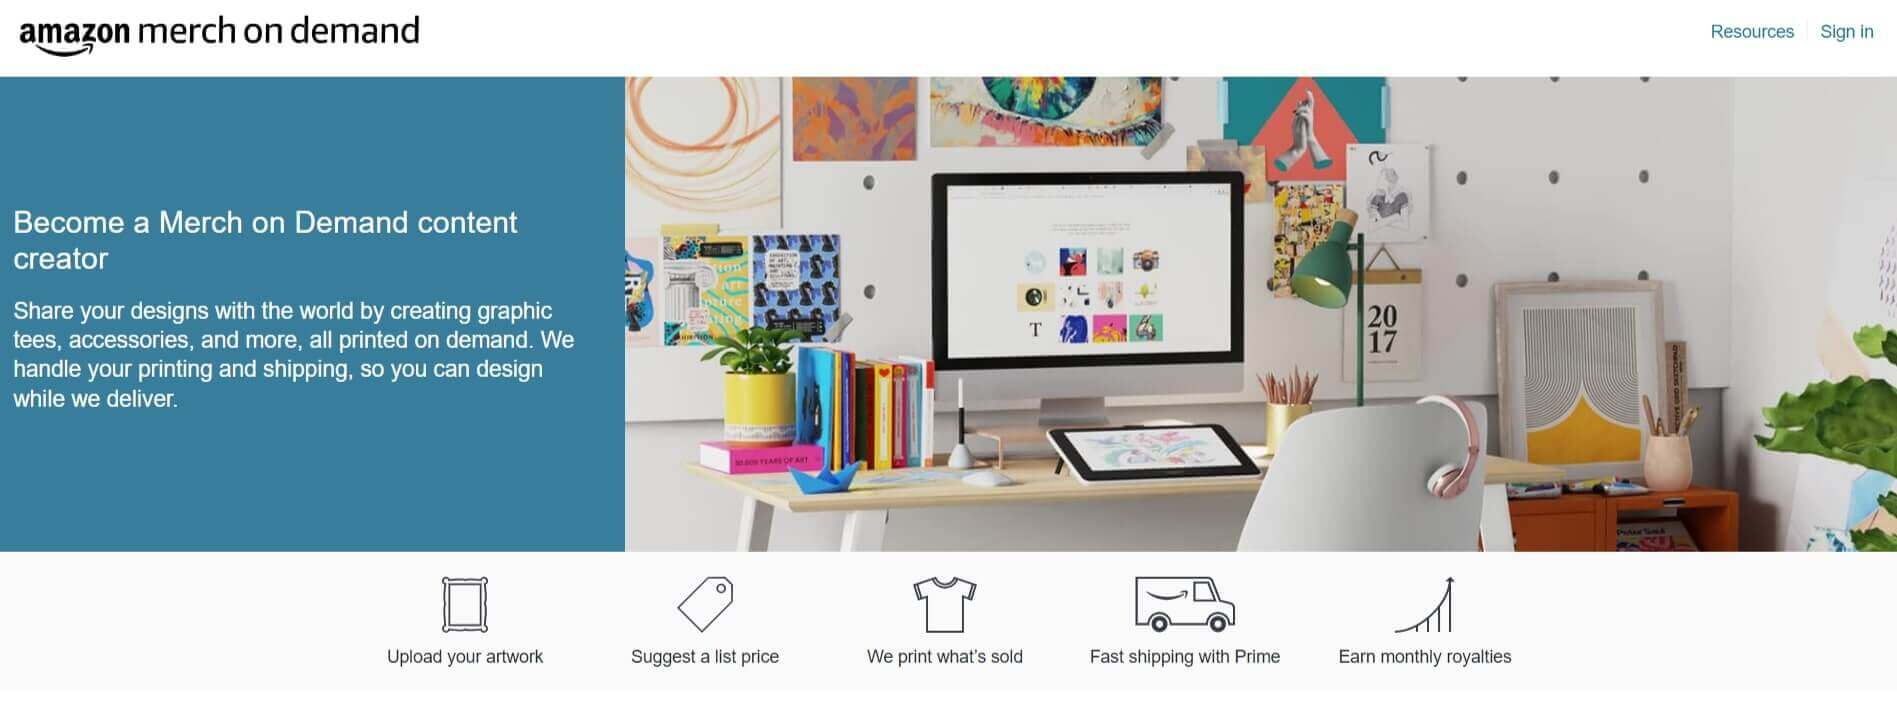 A screenshot of Amazon Merch on Demand website, showing an empty laptop desk with a tablet and colorful drawings on the wall on the right and a text encouraging site visitors to become Merch on Demand Content Creators.